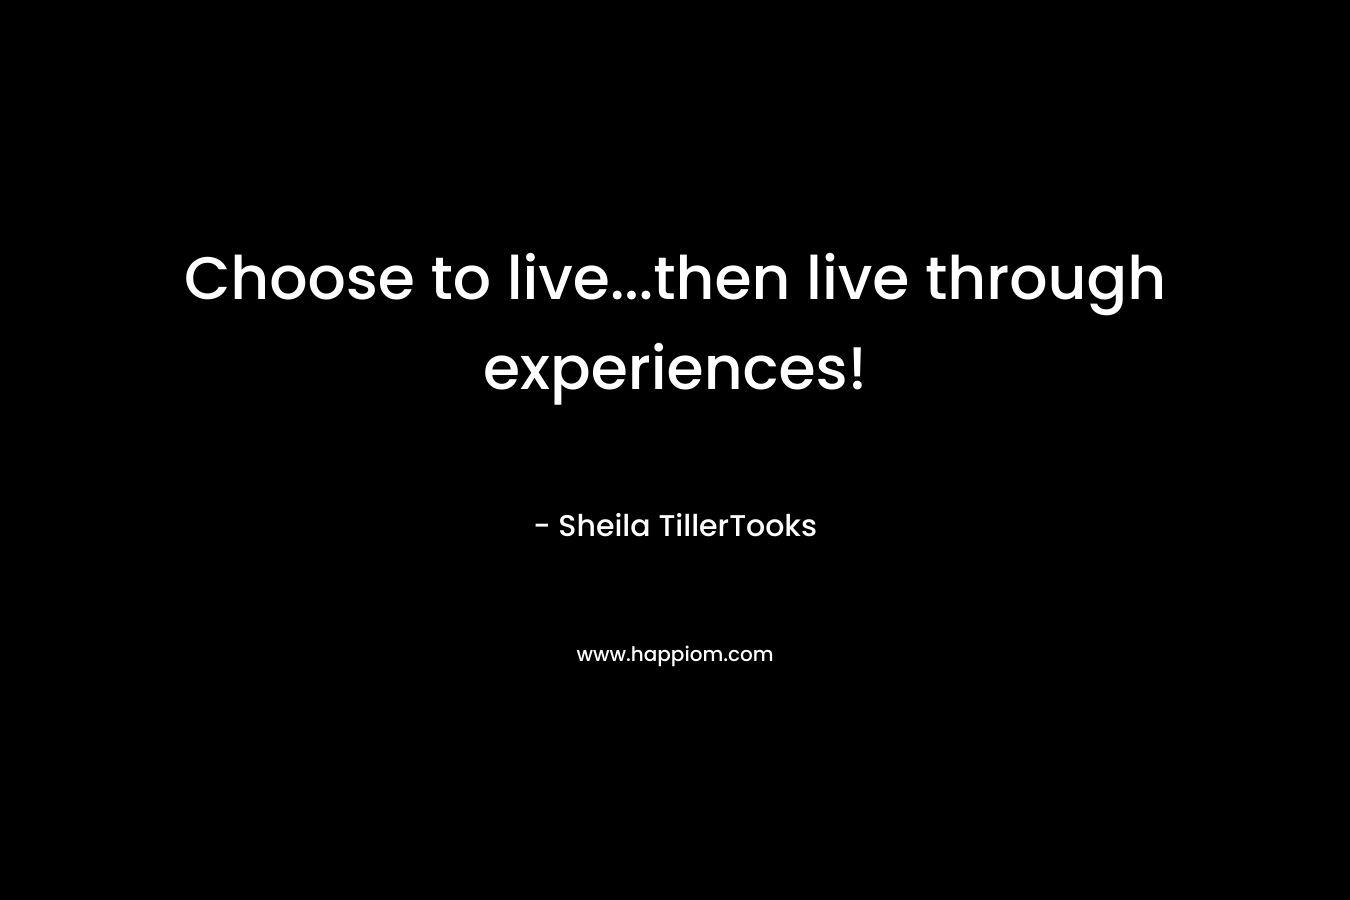 Choose to live...then live through experiences!